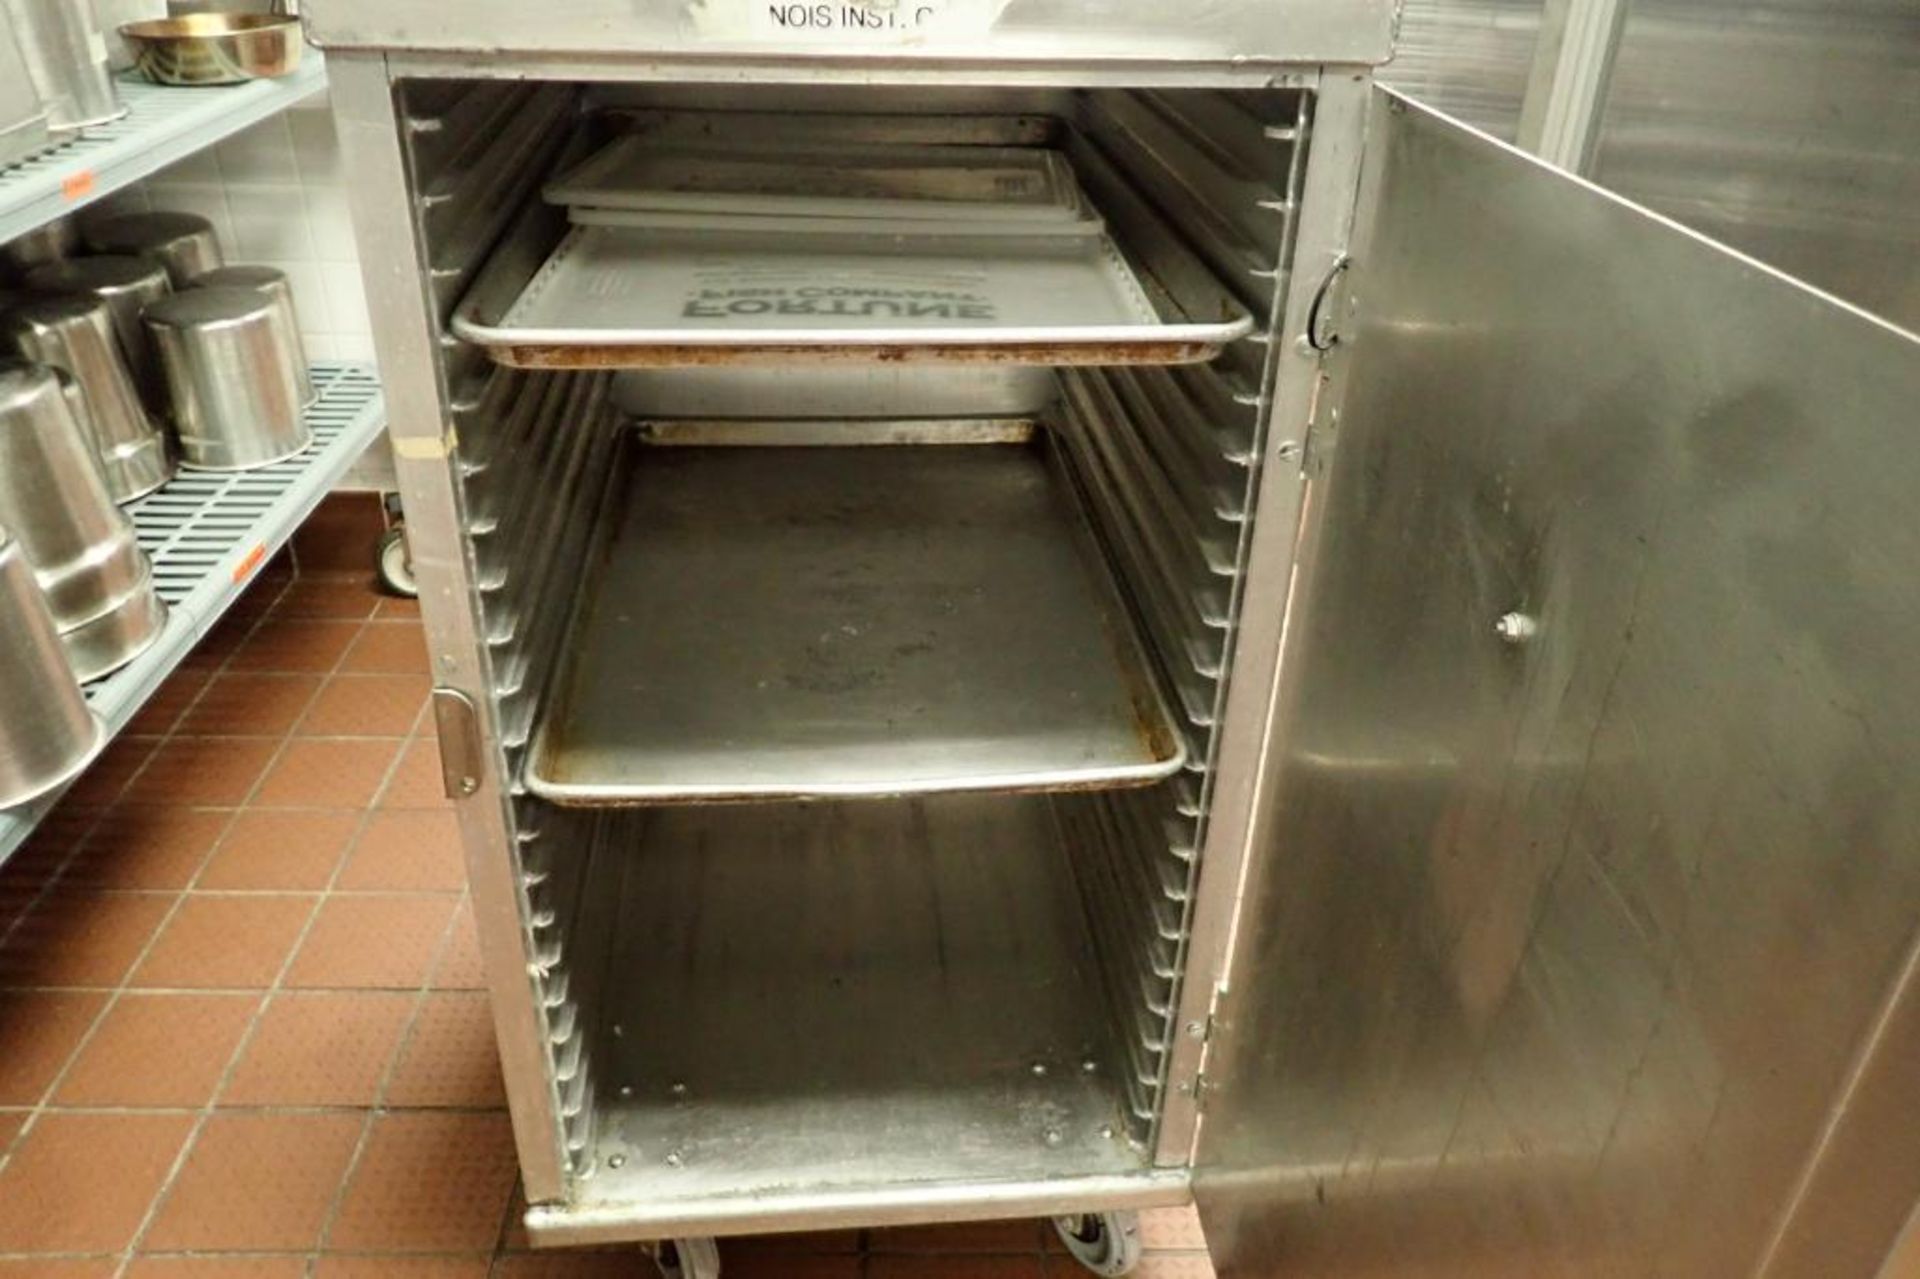 Aluminum holding cabinet for trays, 21 in. wide x 27 in. deep x 41 in. tall, on casters - Image 2 of 4